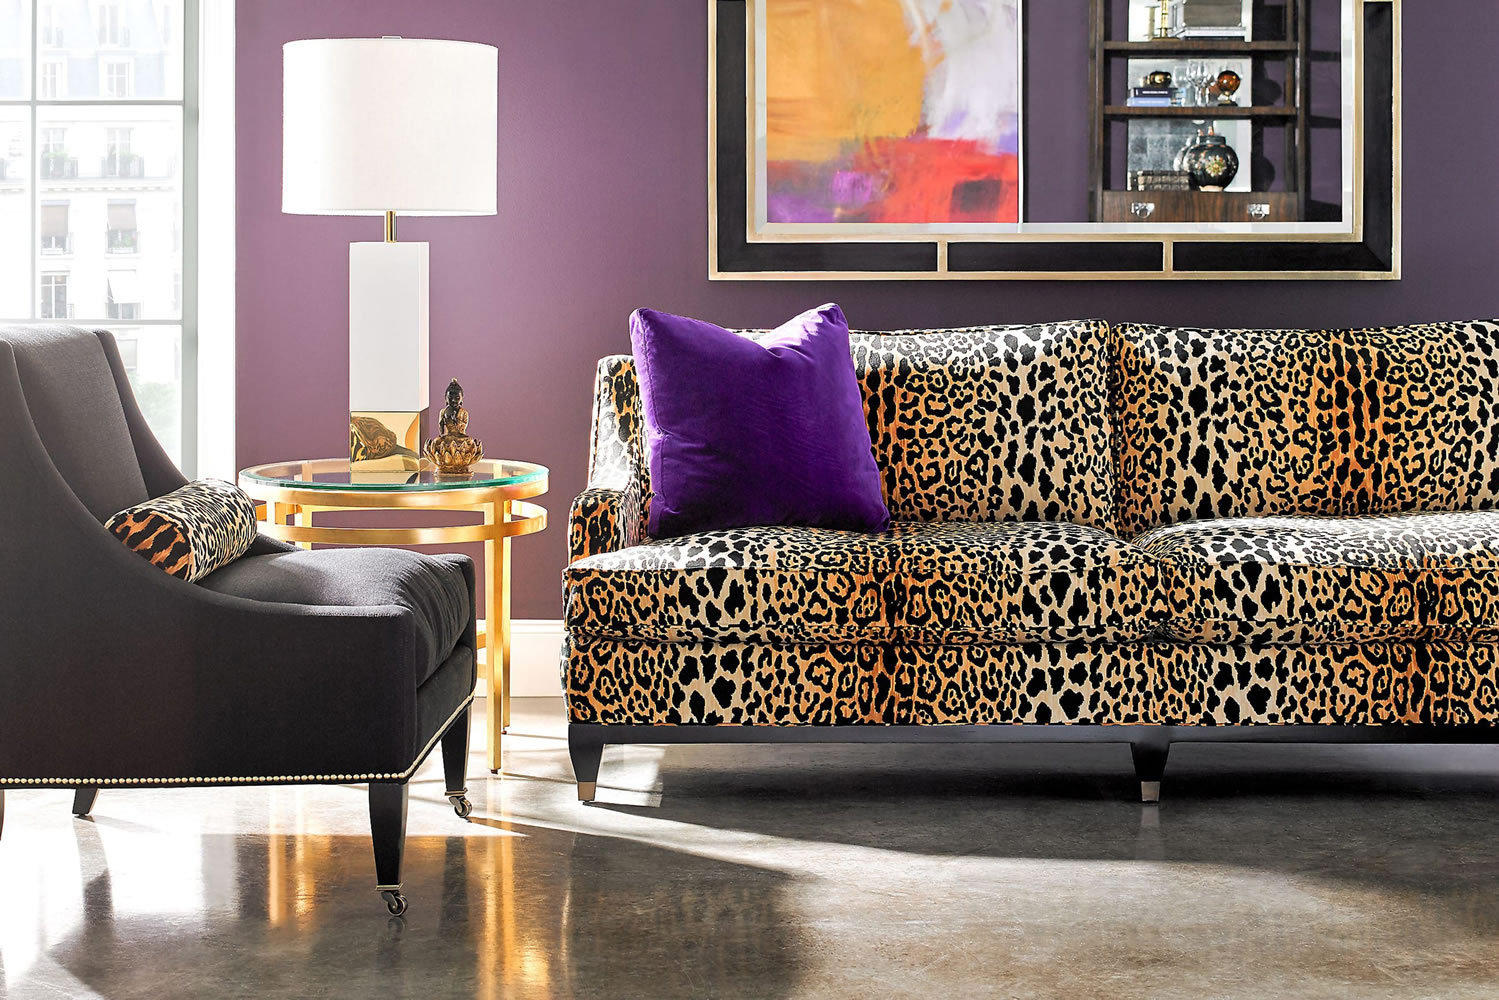 Condo design: living room with leopard sofa and bright patterns